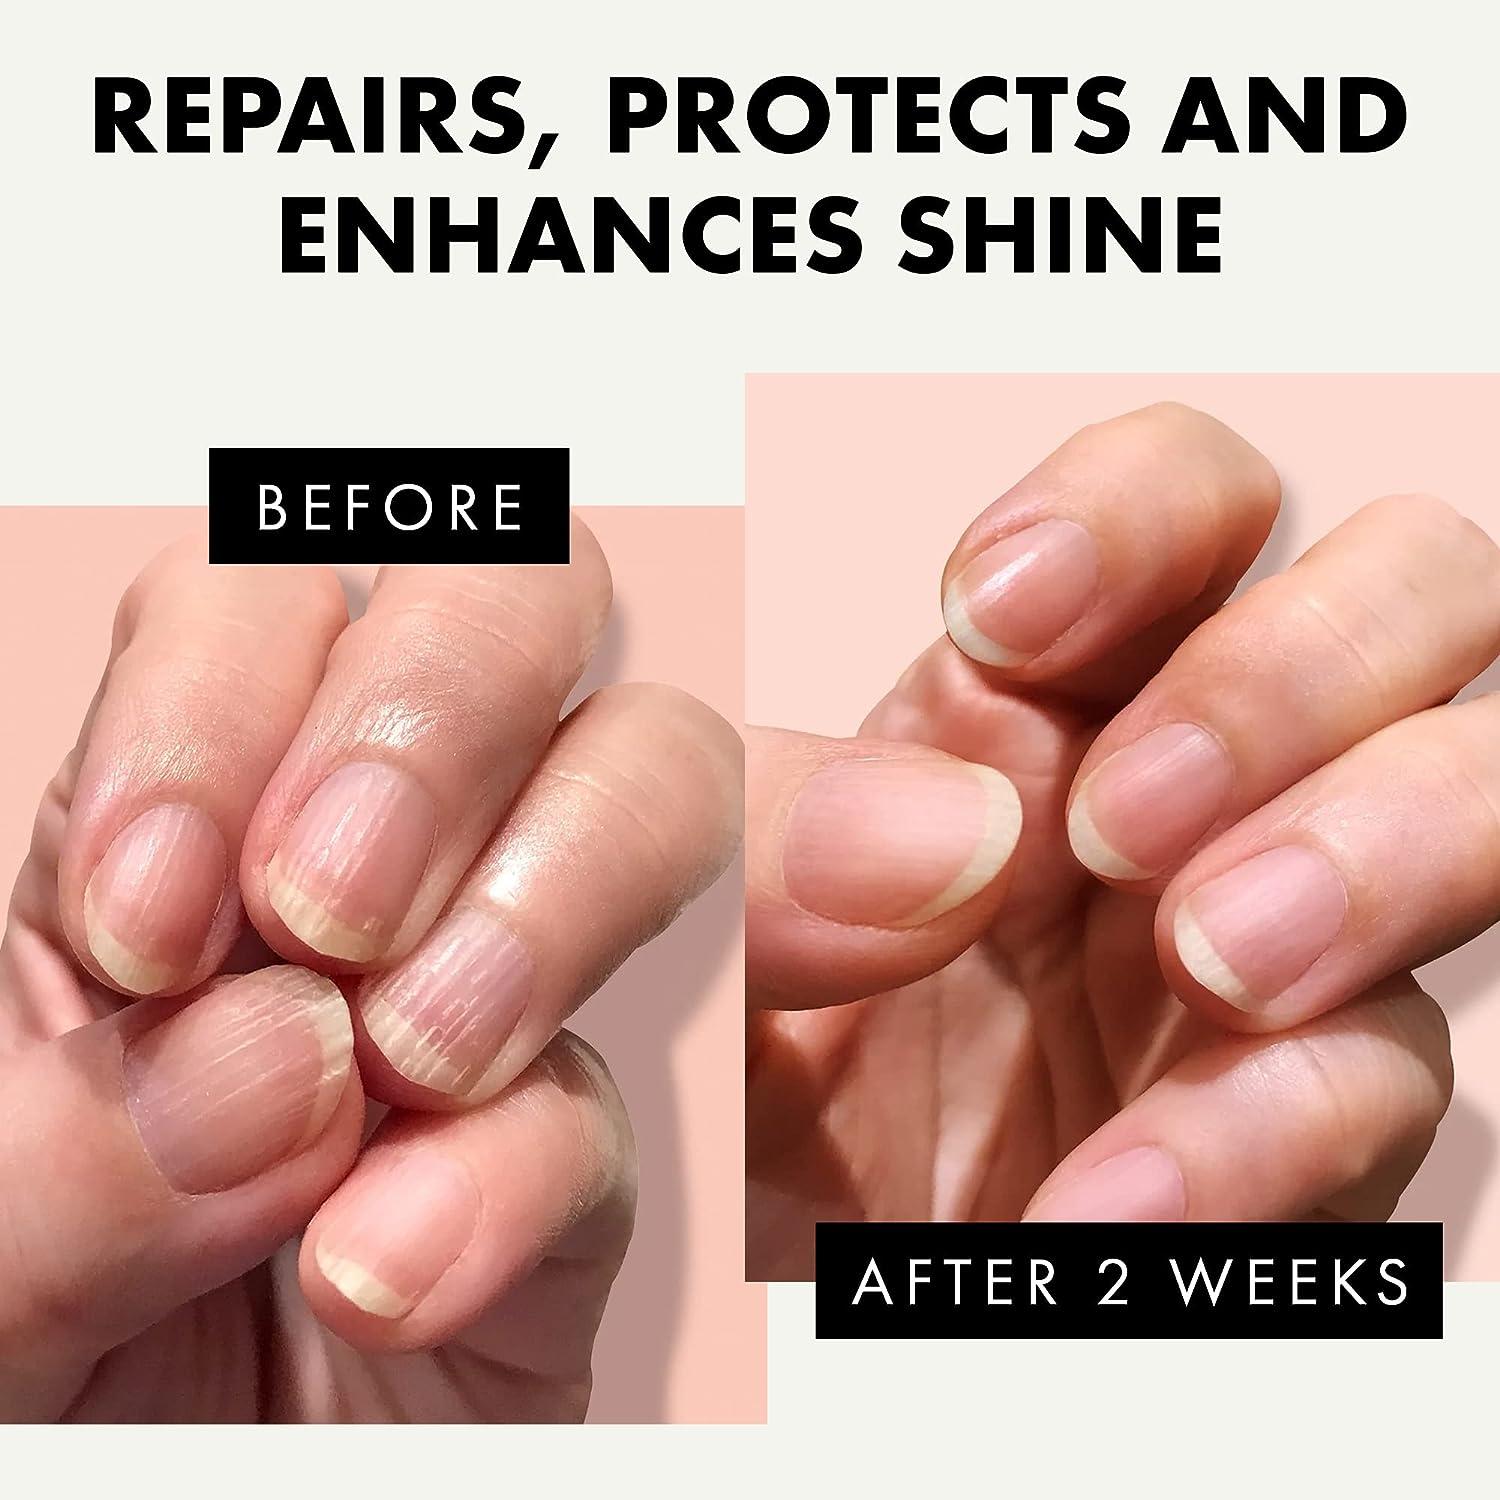 How to fix damaged nails - Quora